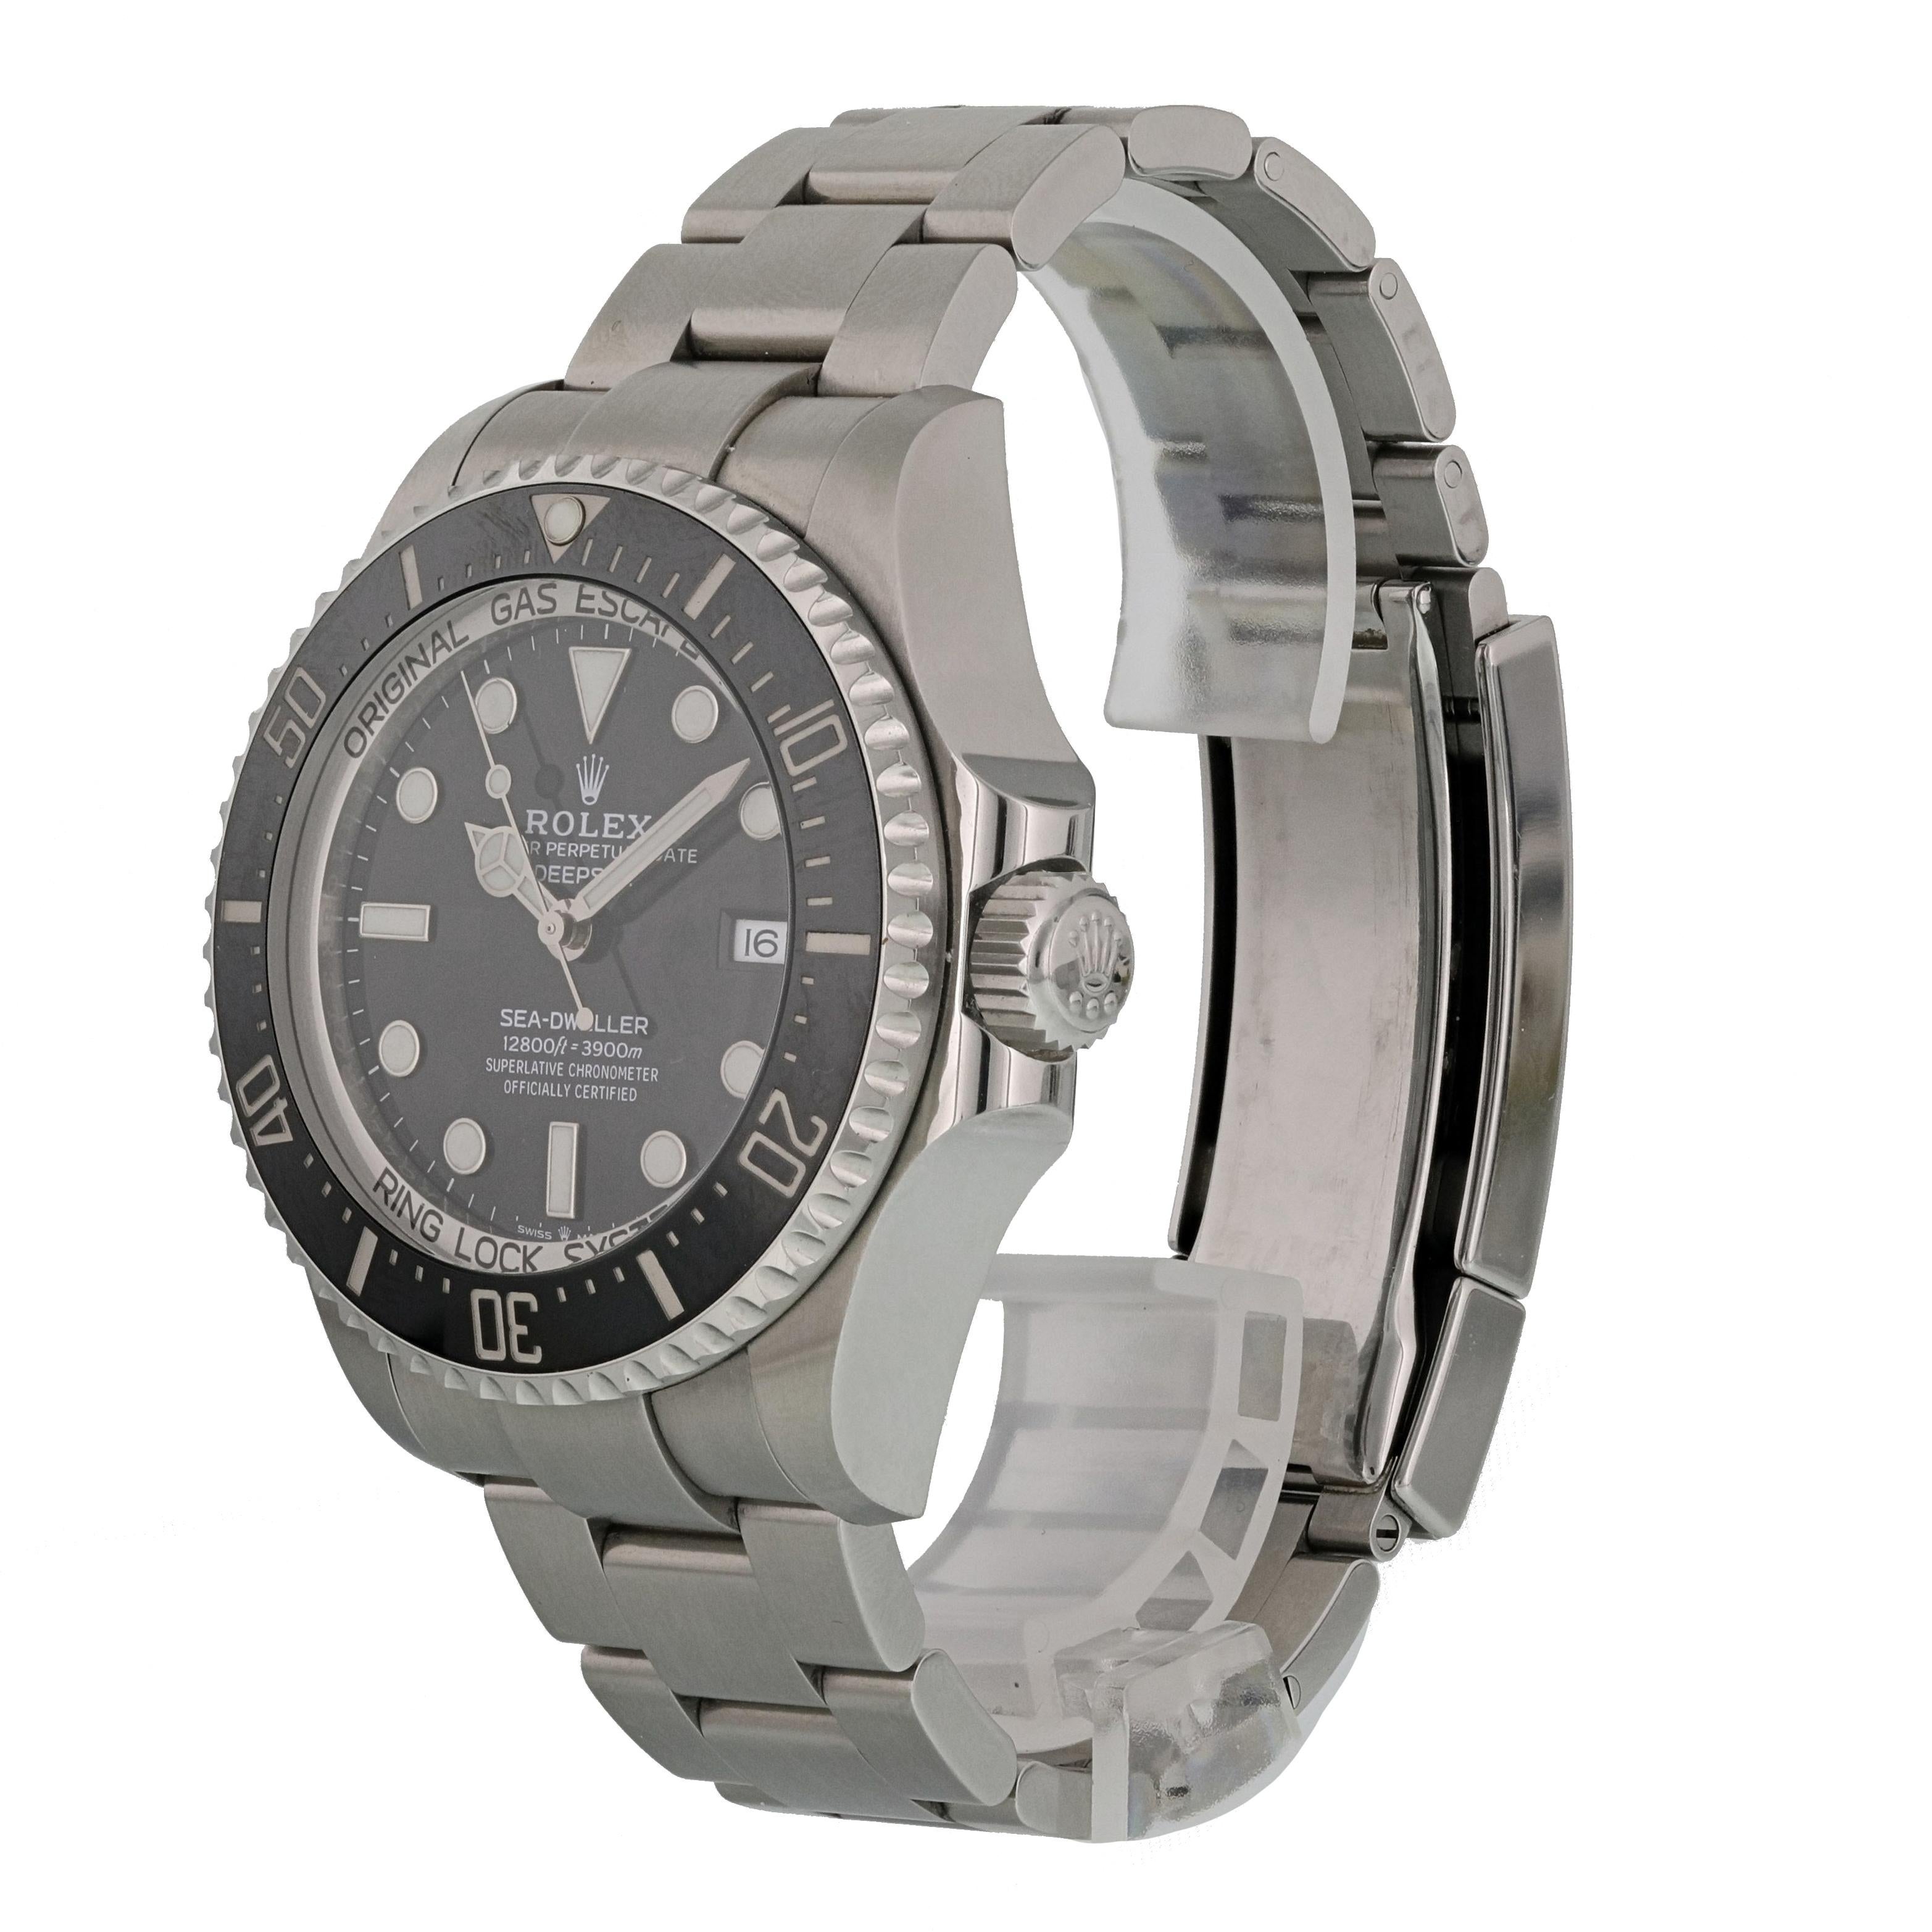 Rolex Sea Dweller Deepsea 126660 Mens Watch
44mm Stainless Steel case. 
Stainless Steel Unidirectional bezel. 
Black dial with Luminous Steel hands and dot hour markers. 
Minute markers on the outer dial. 
Date display at the 3 o'clock position.